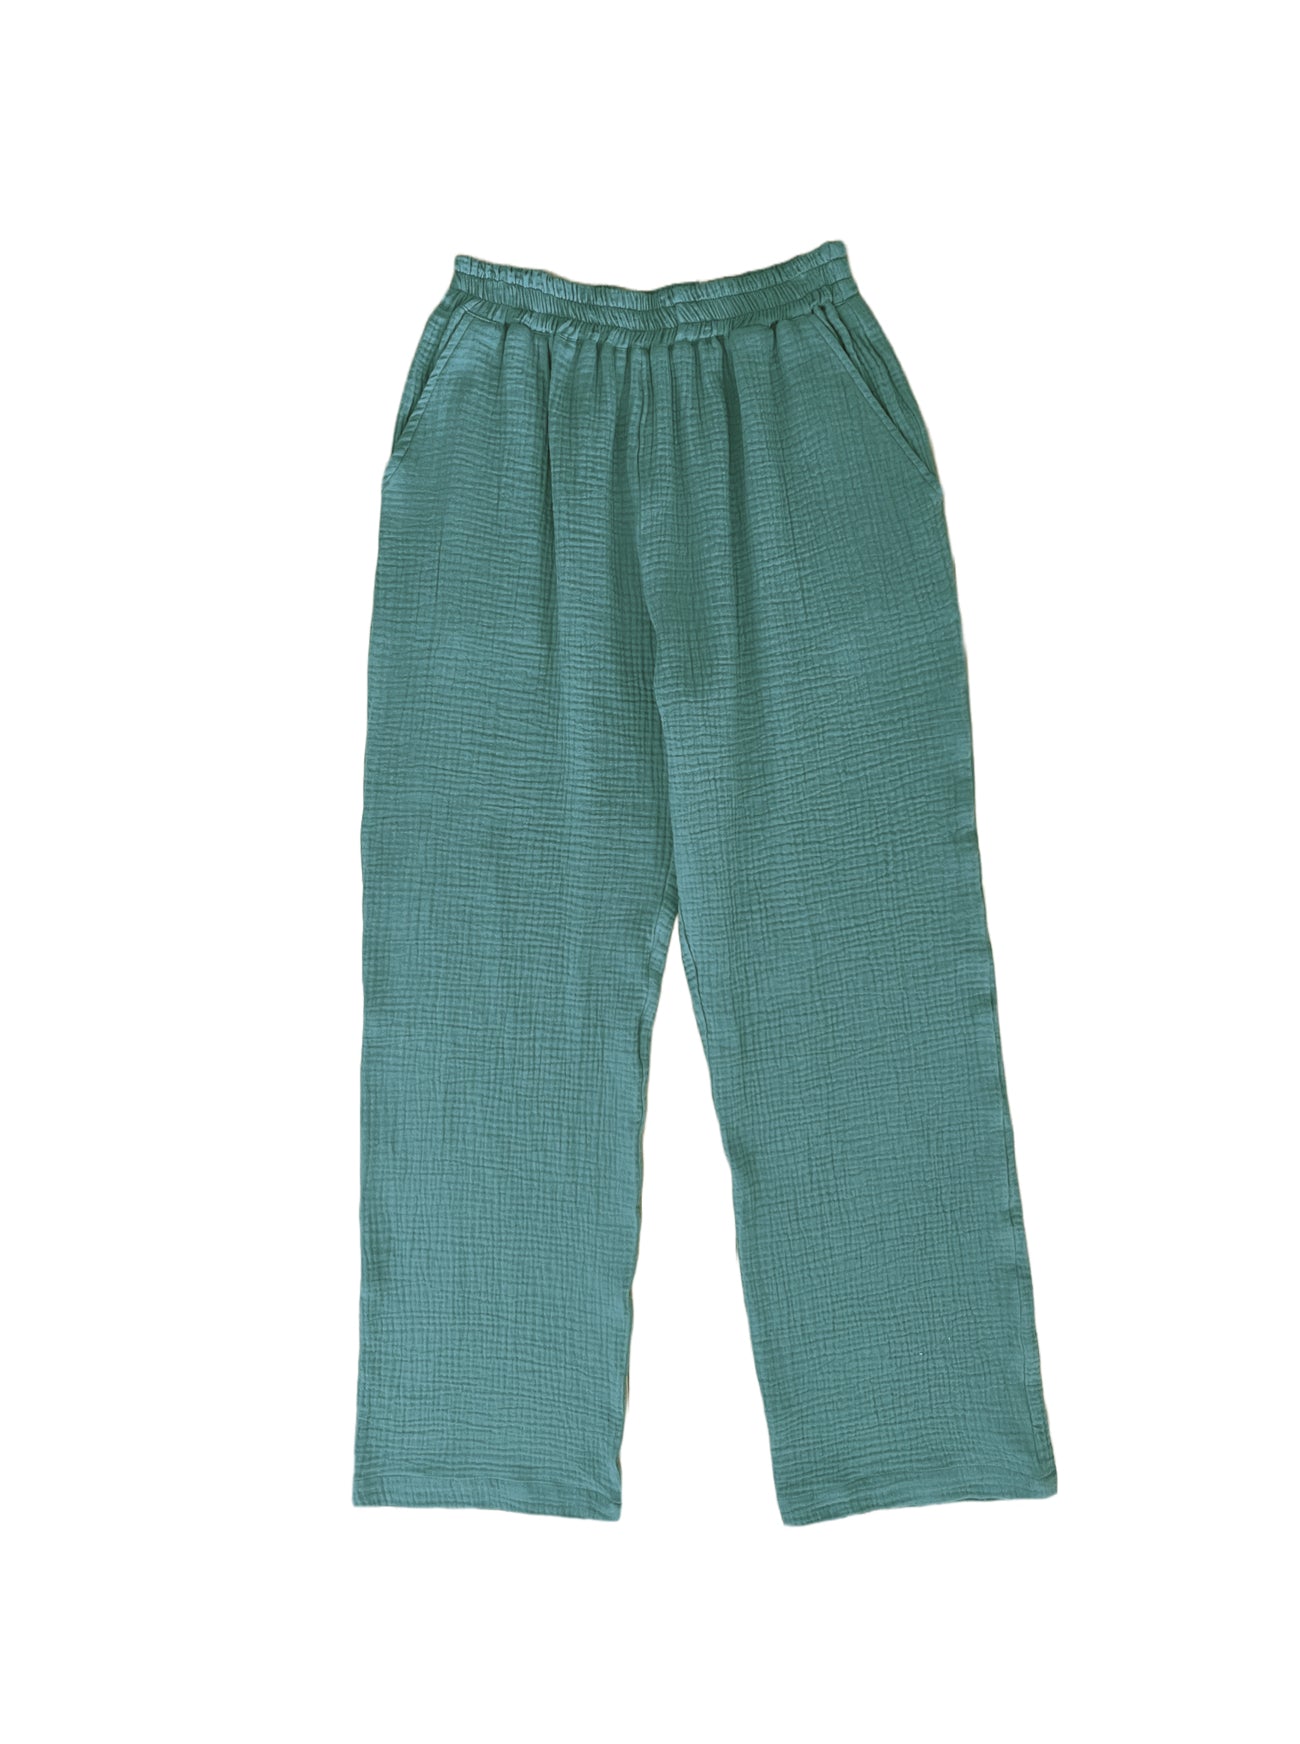 cardiff ivy gauze pant front view